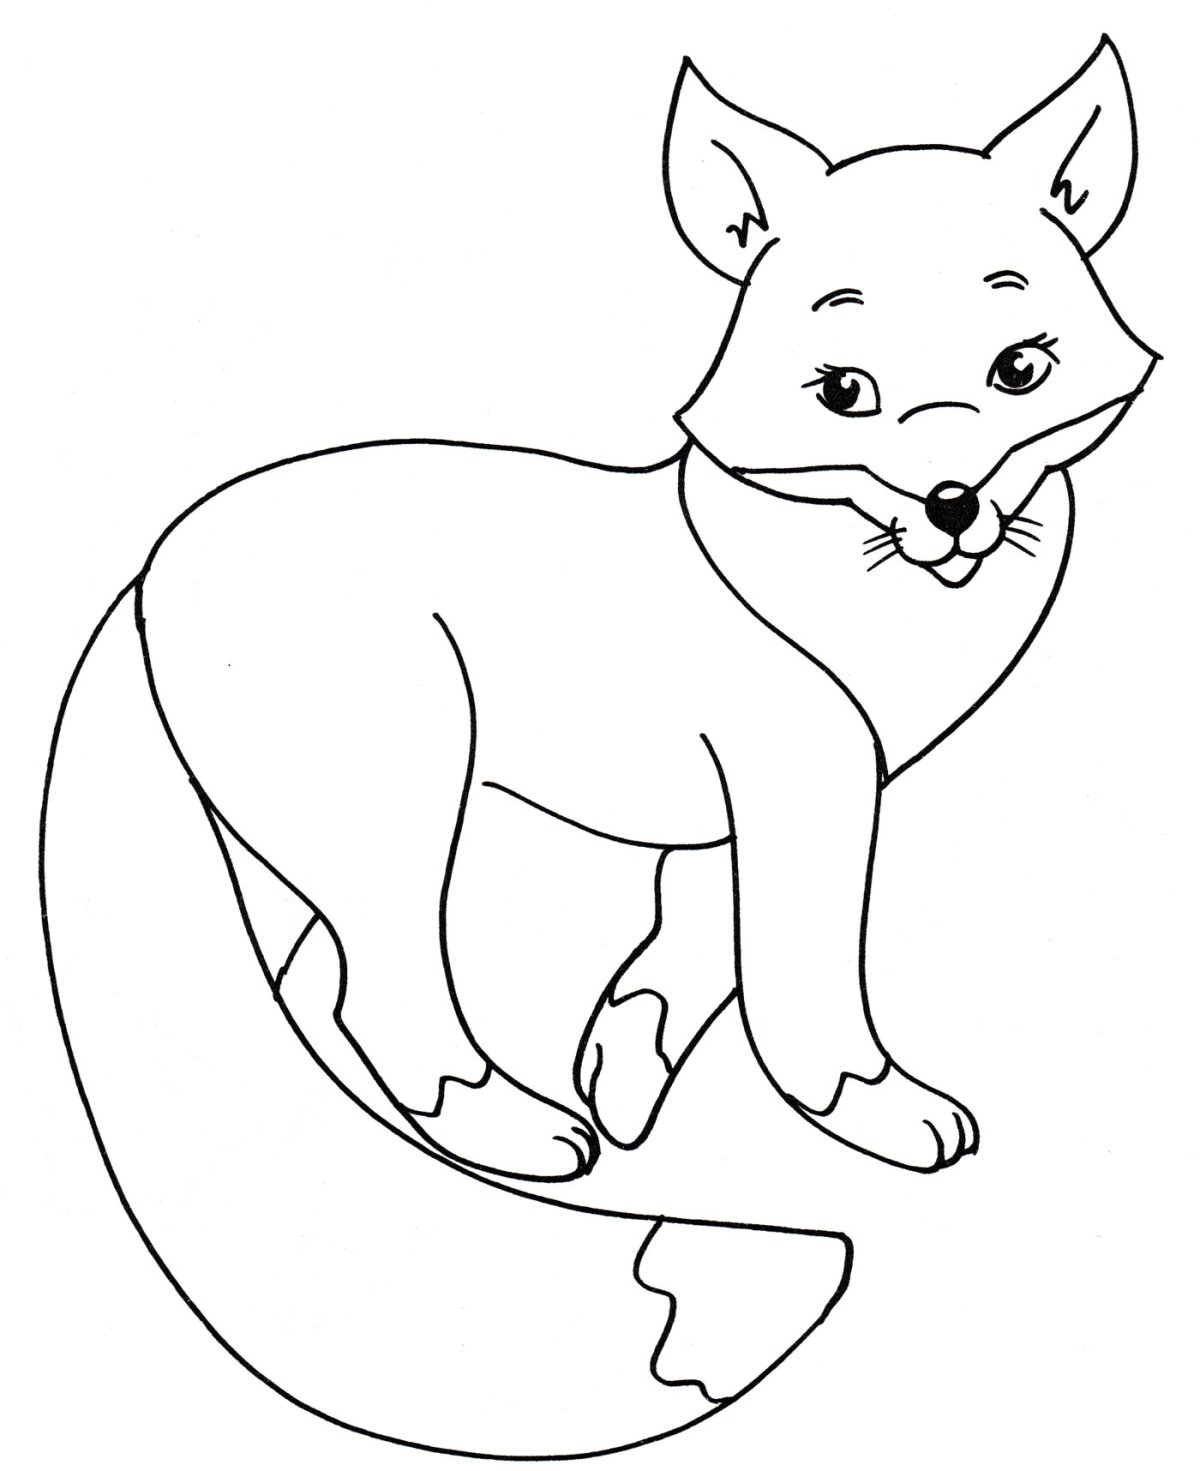 Amazing fox coloring pages for kids 2-3 years old